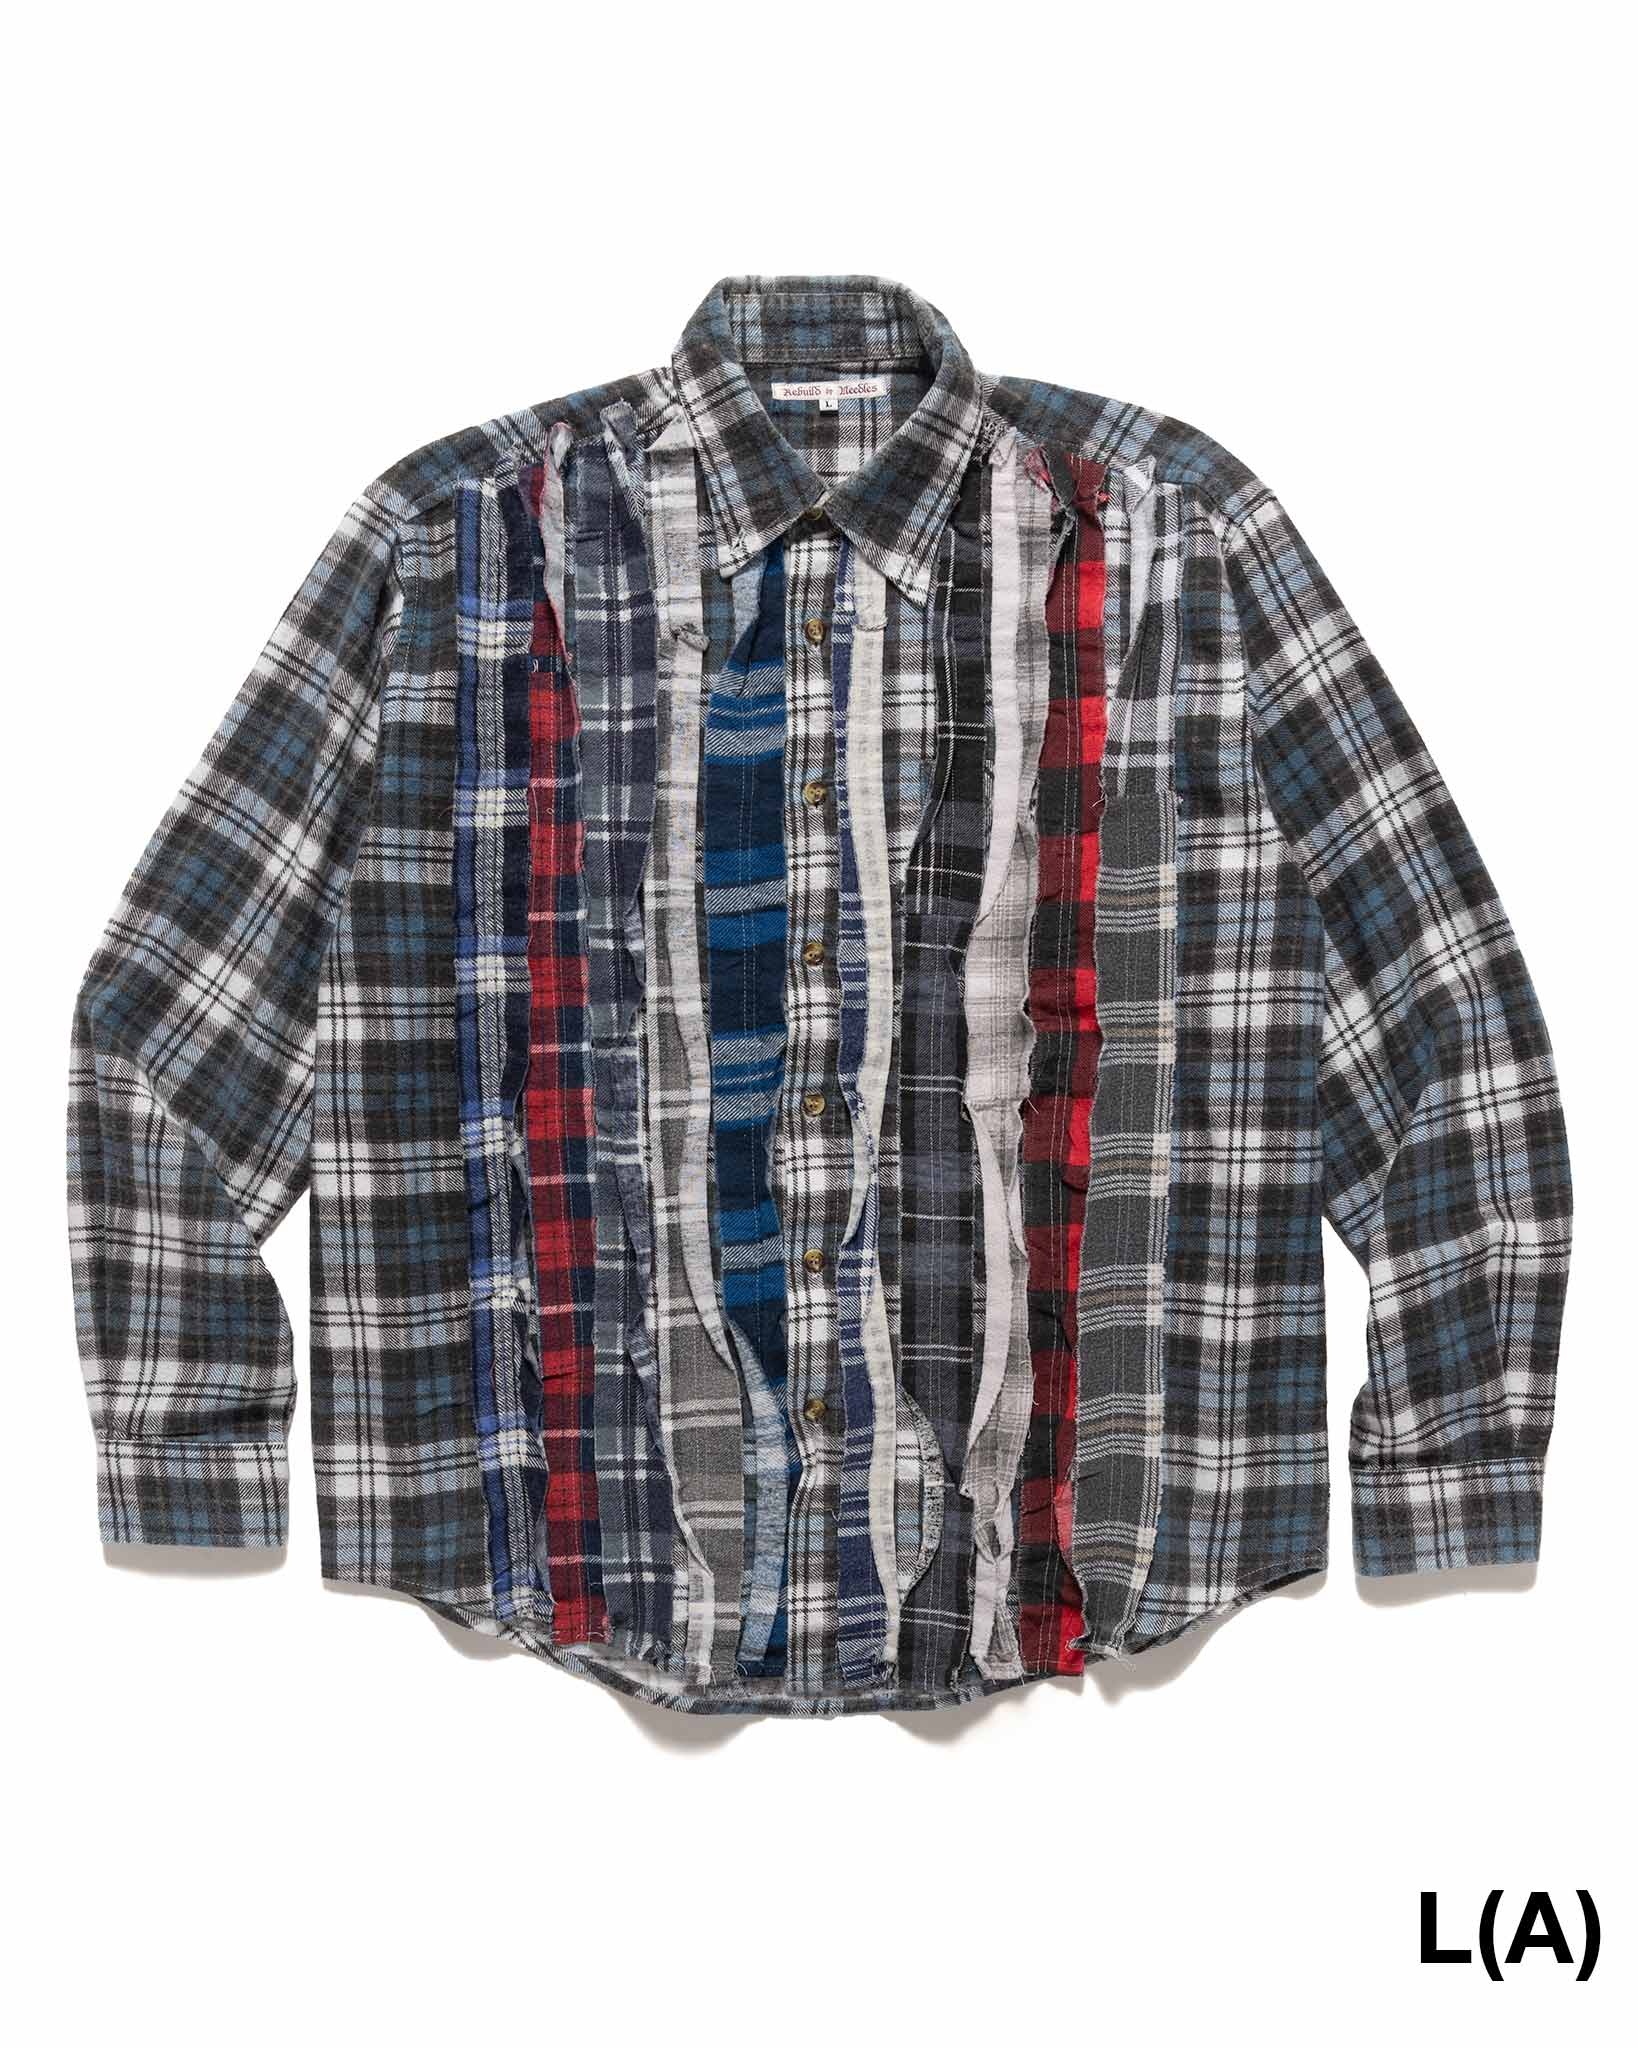 Rebuild by Needles Flannel Shirt -> Ribbon Shirt Assorted - 13